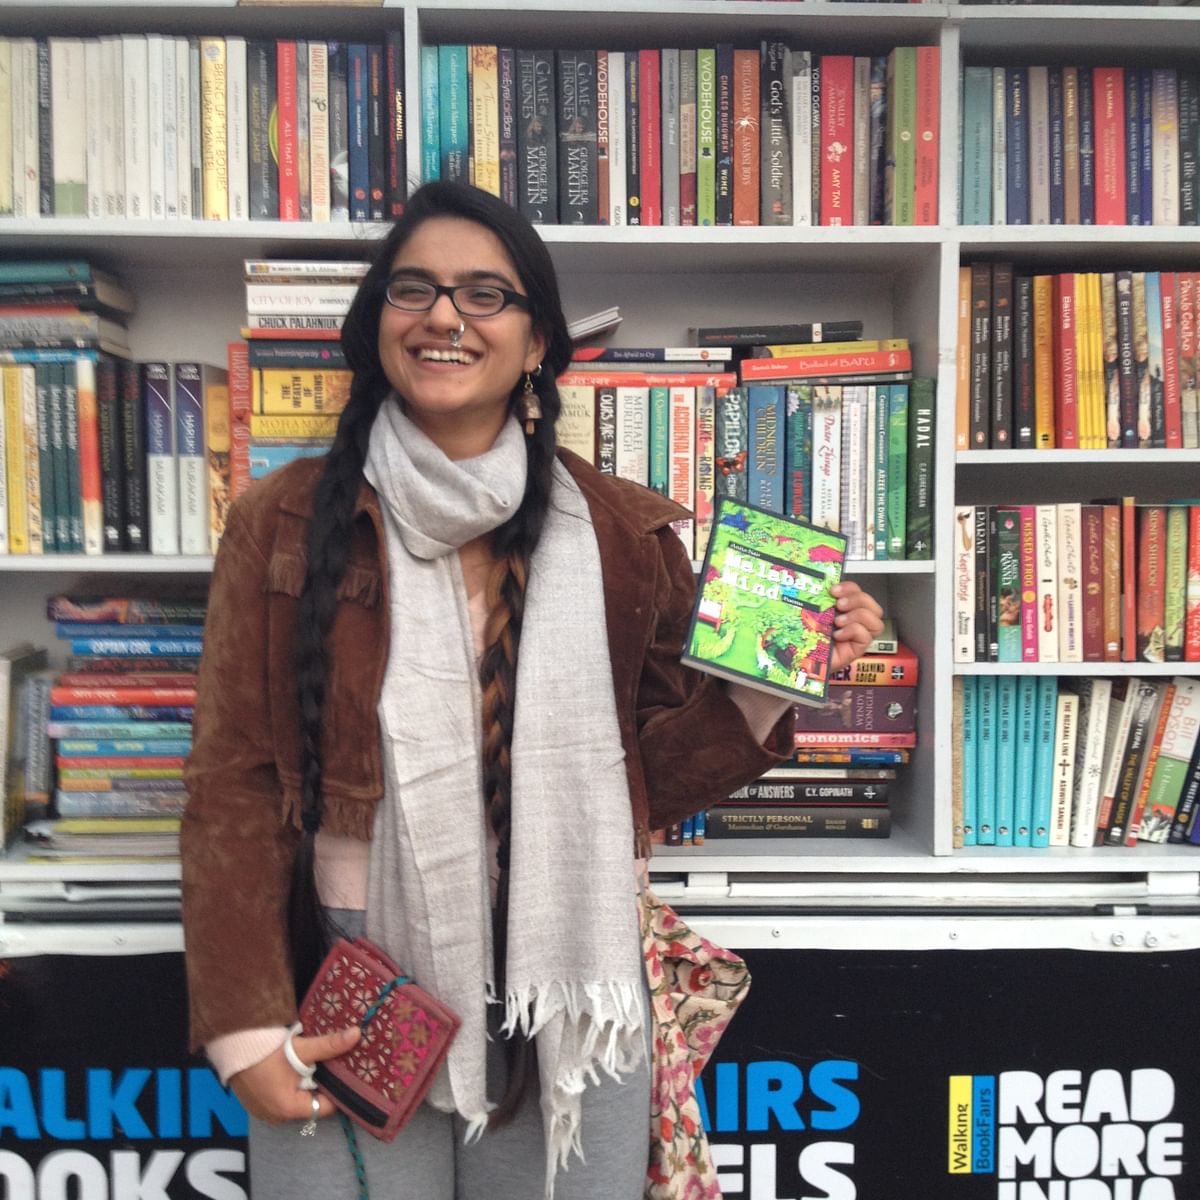 This young couple quit cushy jobs to pursue their passion – a bookstore on wheels!